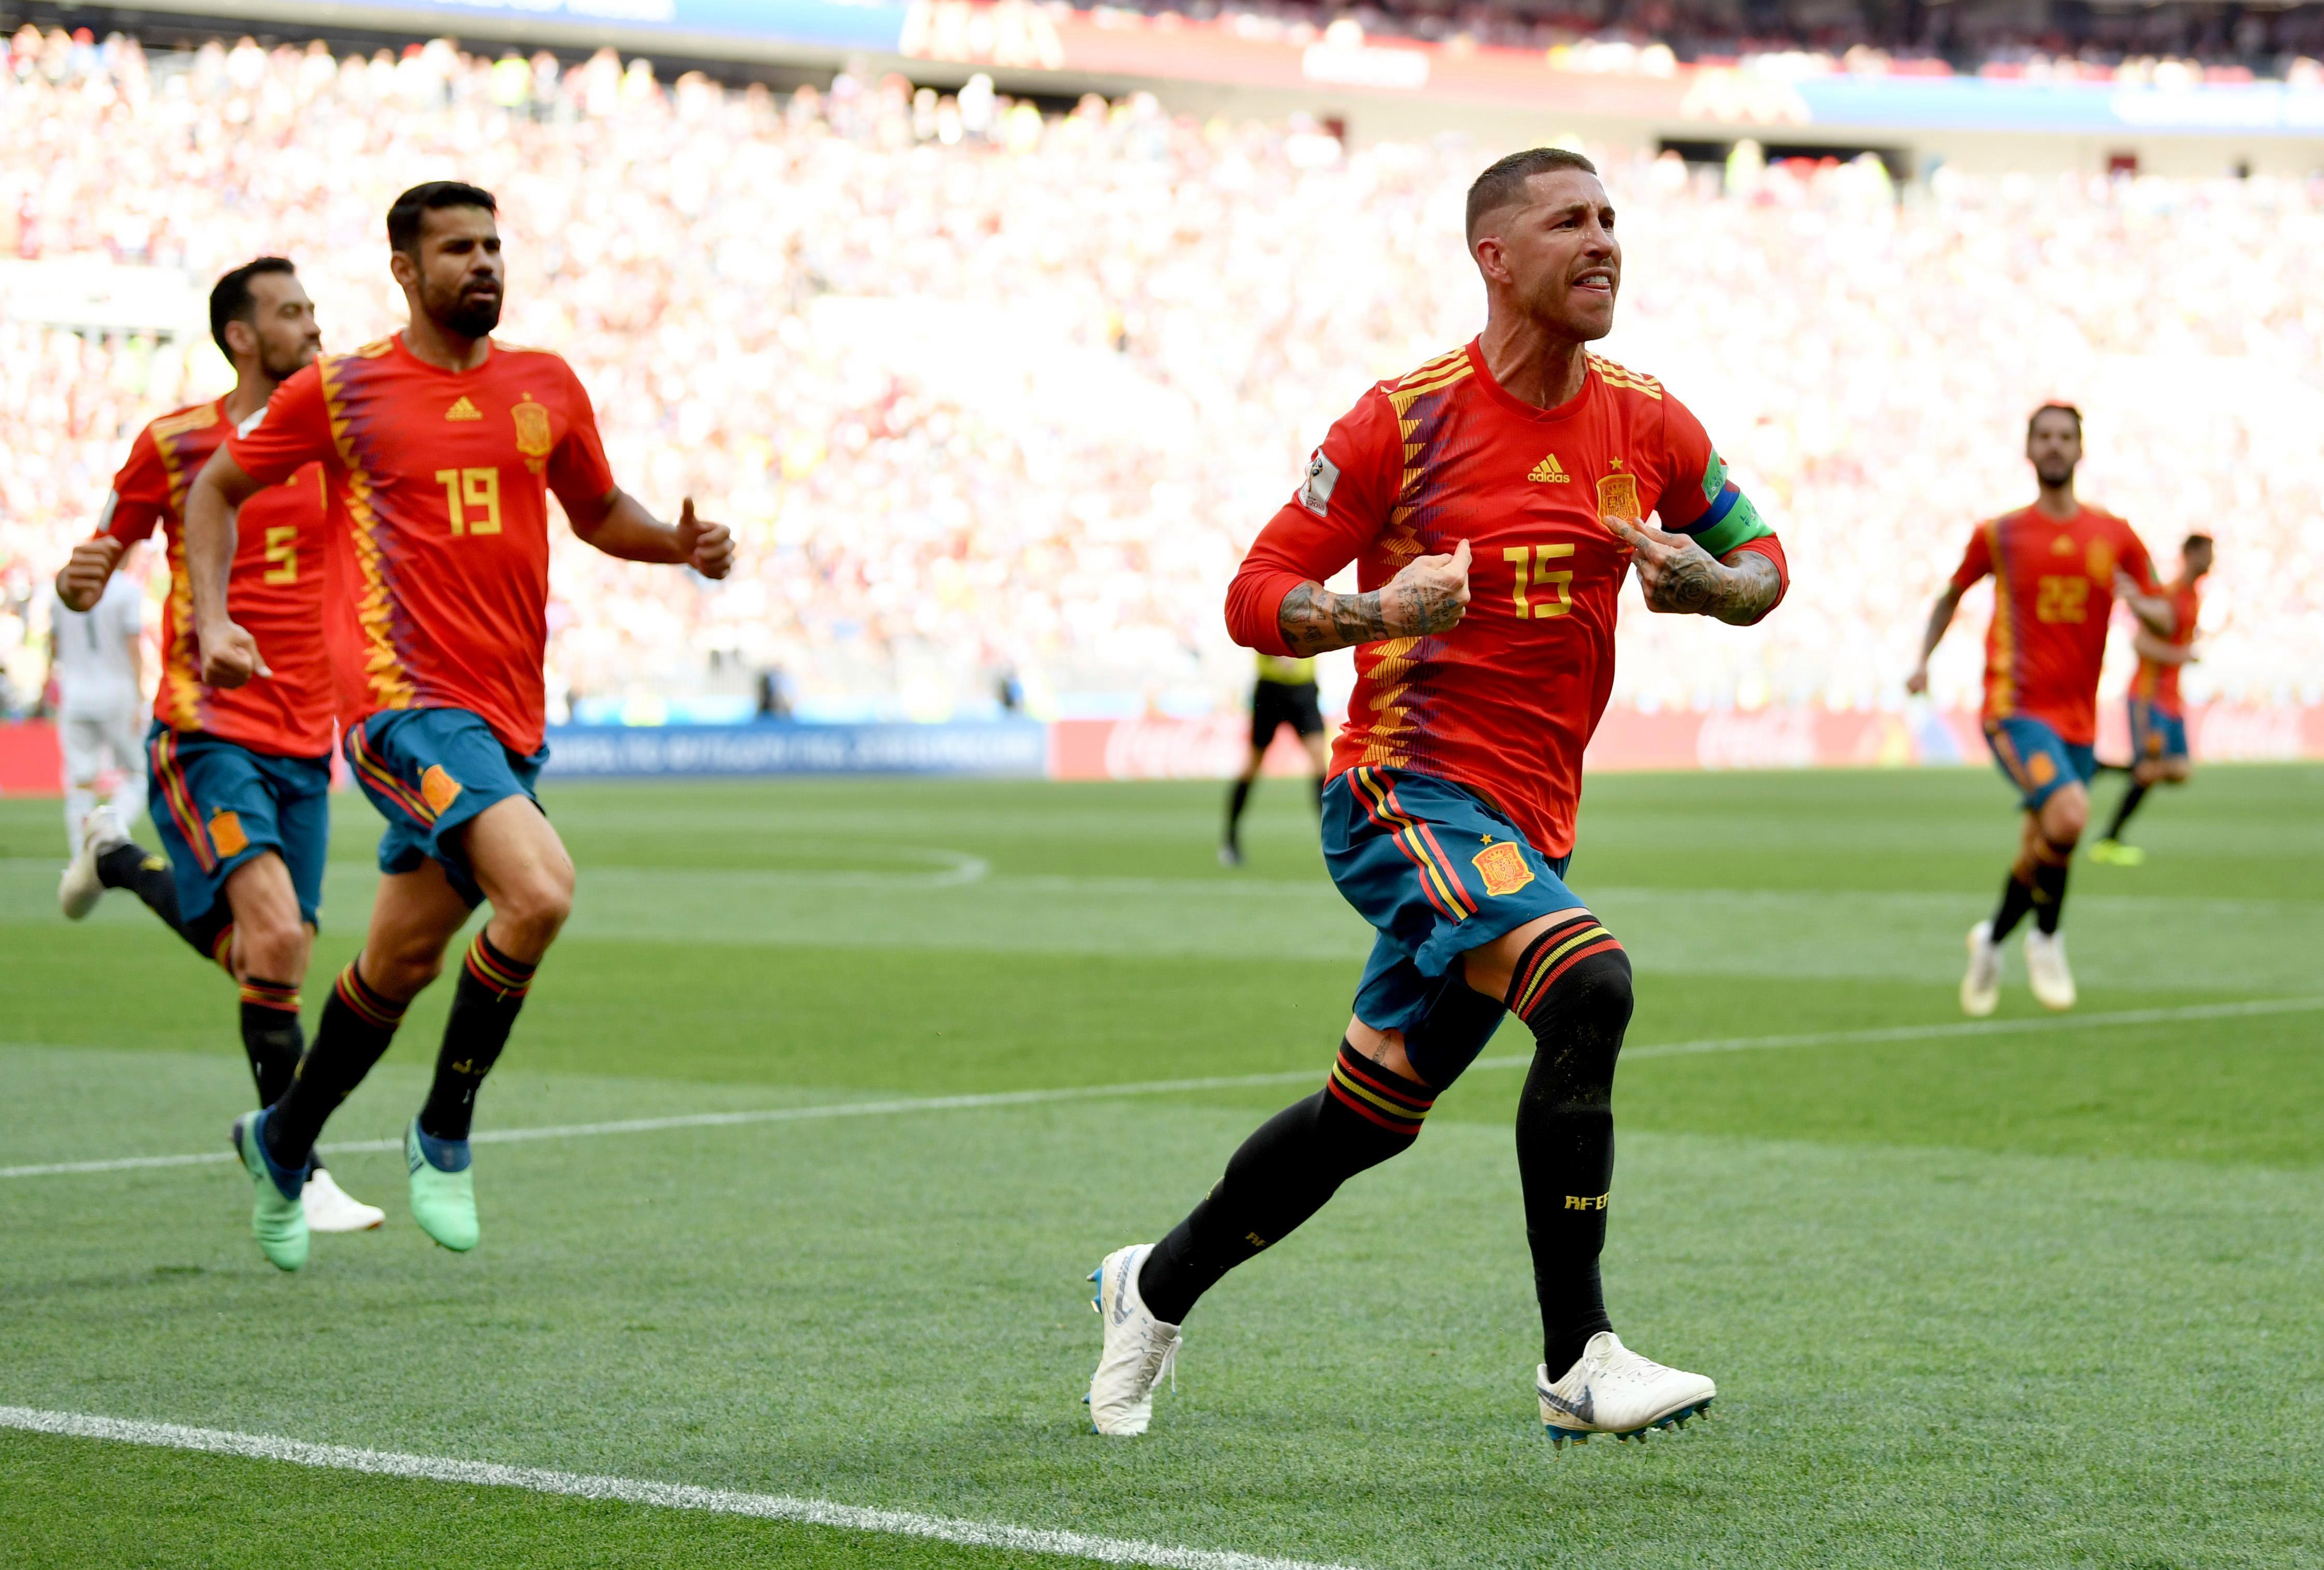 'Celebrating an own goal is just so Sergio Ramos' - Twitter reacts to Spain captain claiming opener against Russia